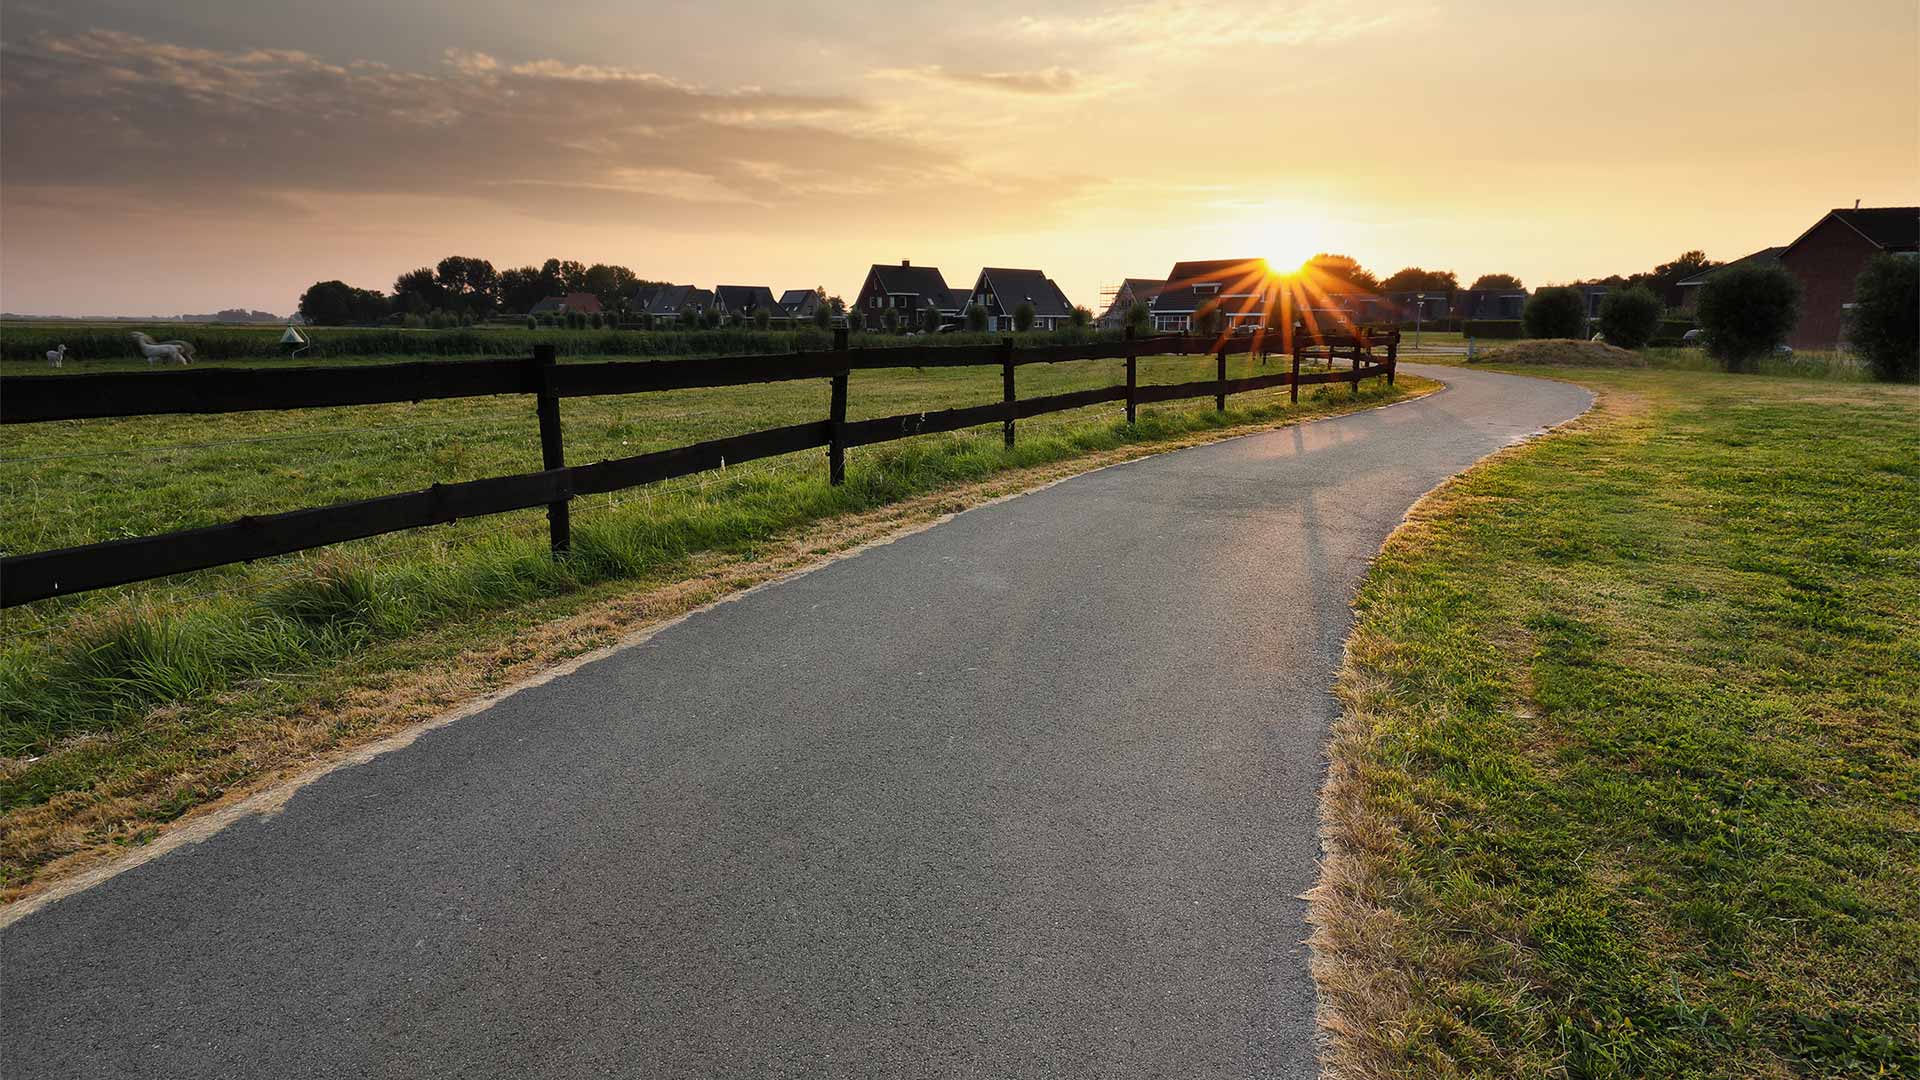 sunshine-over-cycling-path-by-wooden-fence-alpharetta-ga